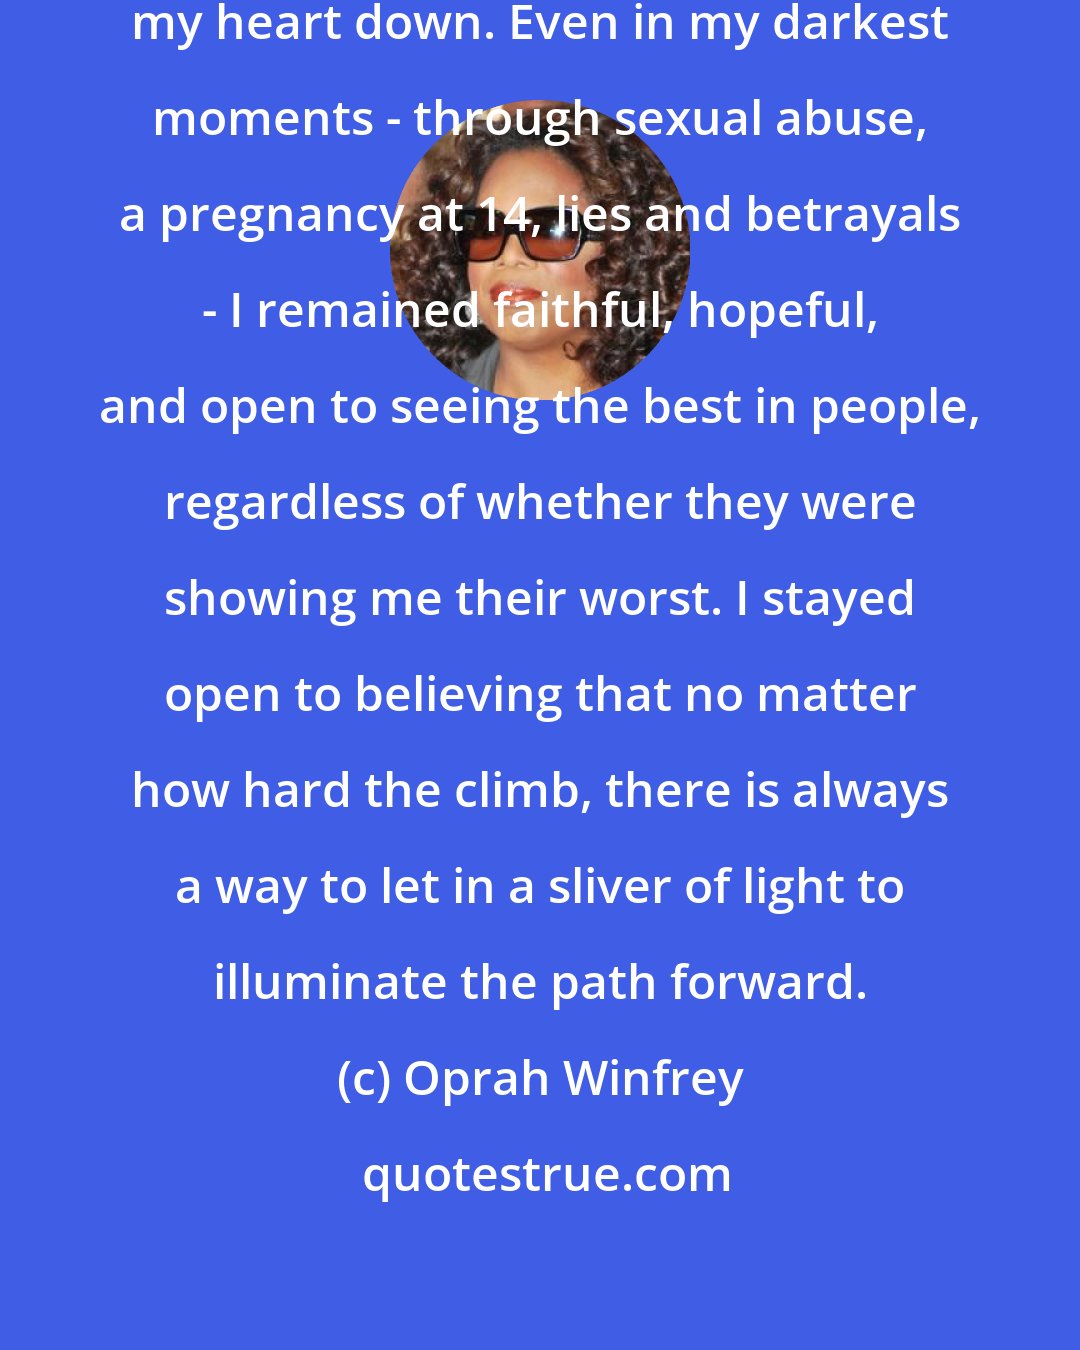 Oprah Winfrey: My highest achievement: never shutting my heart down. Even in my darkest moments - through sexual abuse, a pregnancy at 14, lies and betrayals - I remained faithful, hopeful, and open to seeing the best in people, regardless of whether they were showing me their worst. I stayed open to believing that no matter how hard the climb, there is always a way to let in a sliver of light to illuminate the path forward.